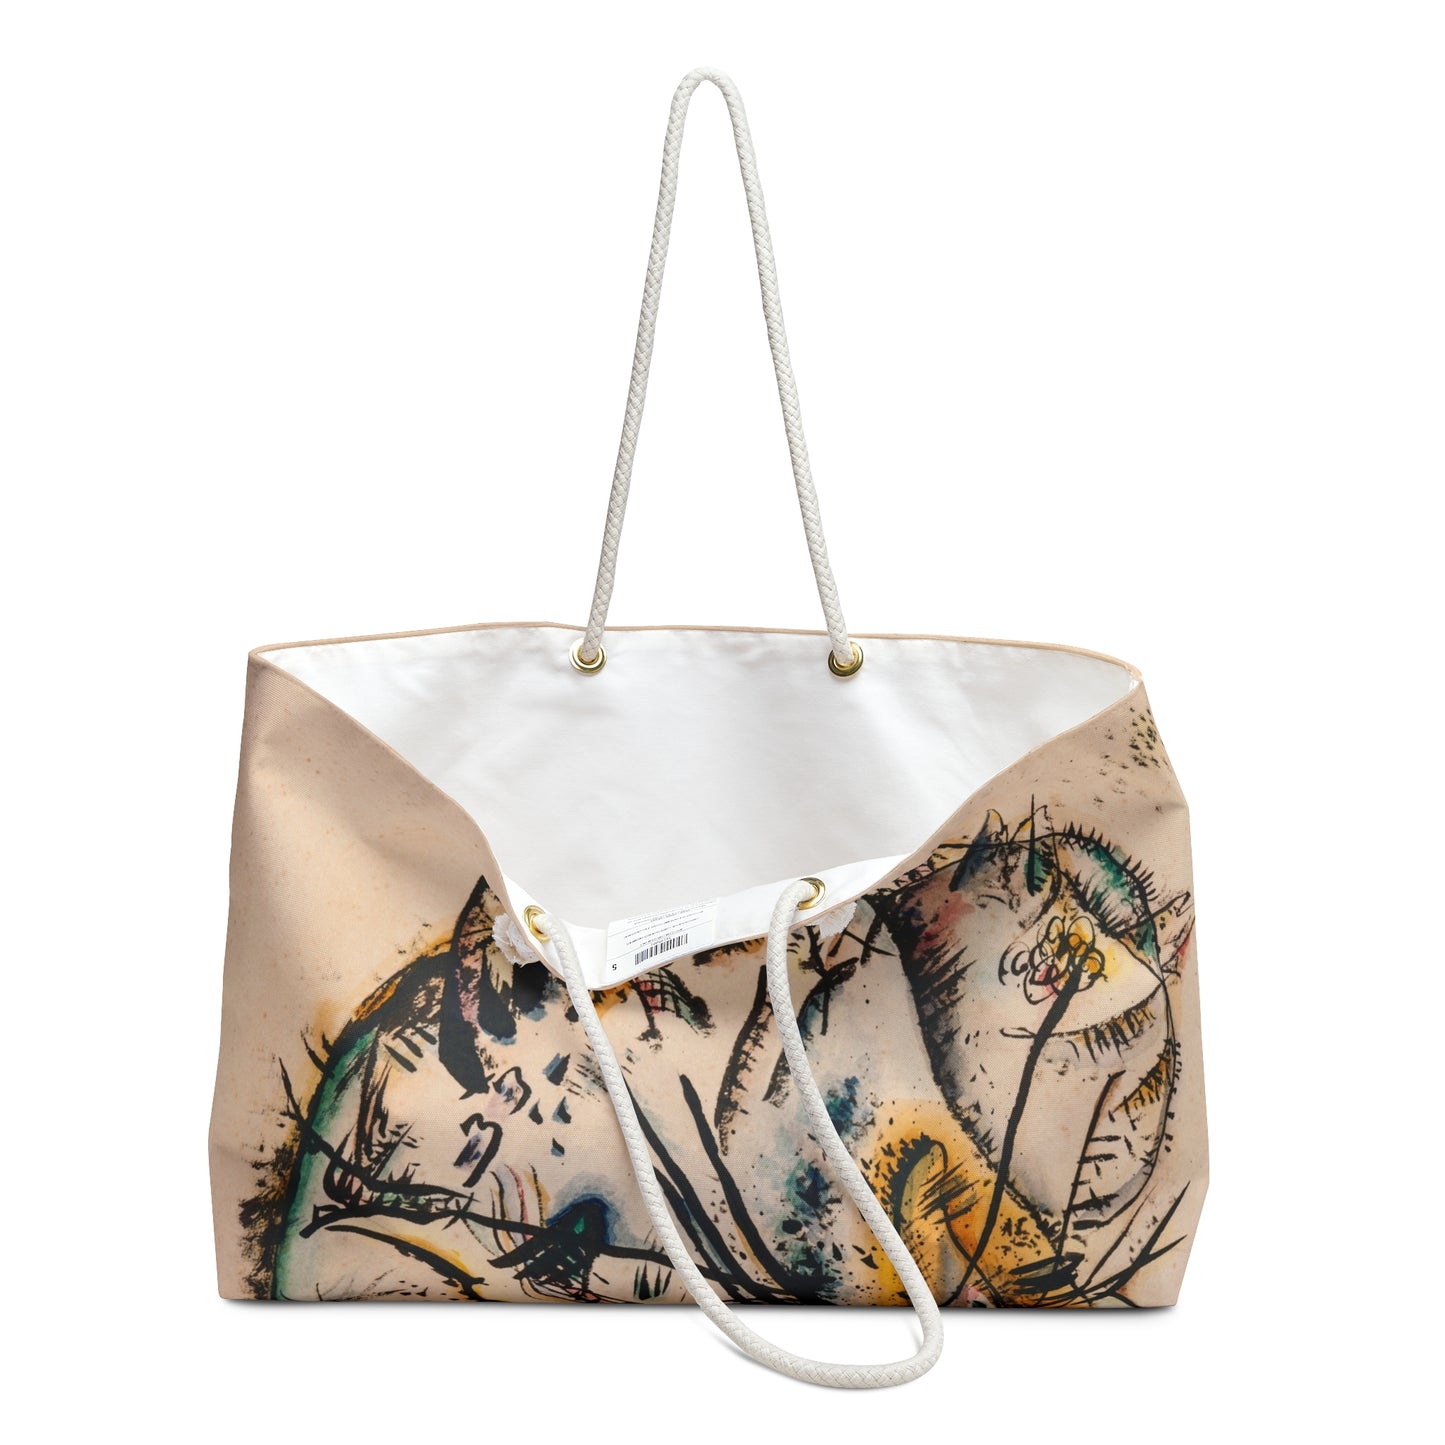 WASSILY KANDINSKY - WATERCOLOUR WITH SEVEN STROKES - WEEKENDER TOTE BAG